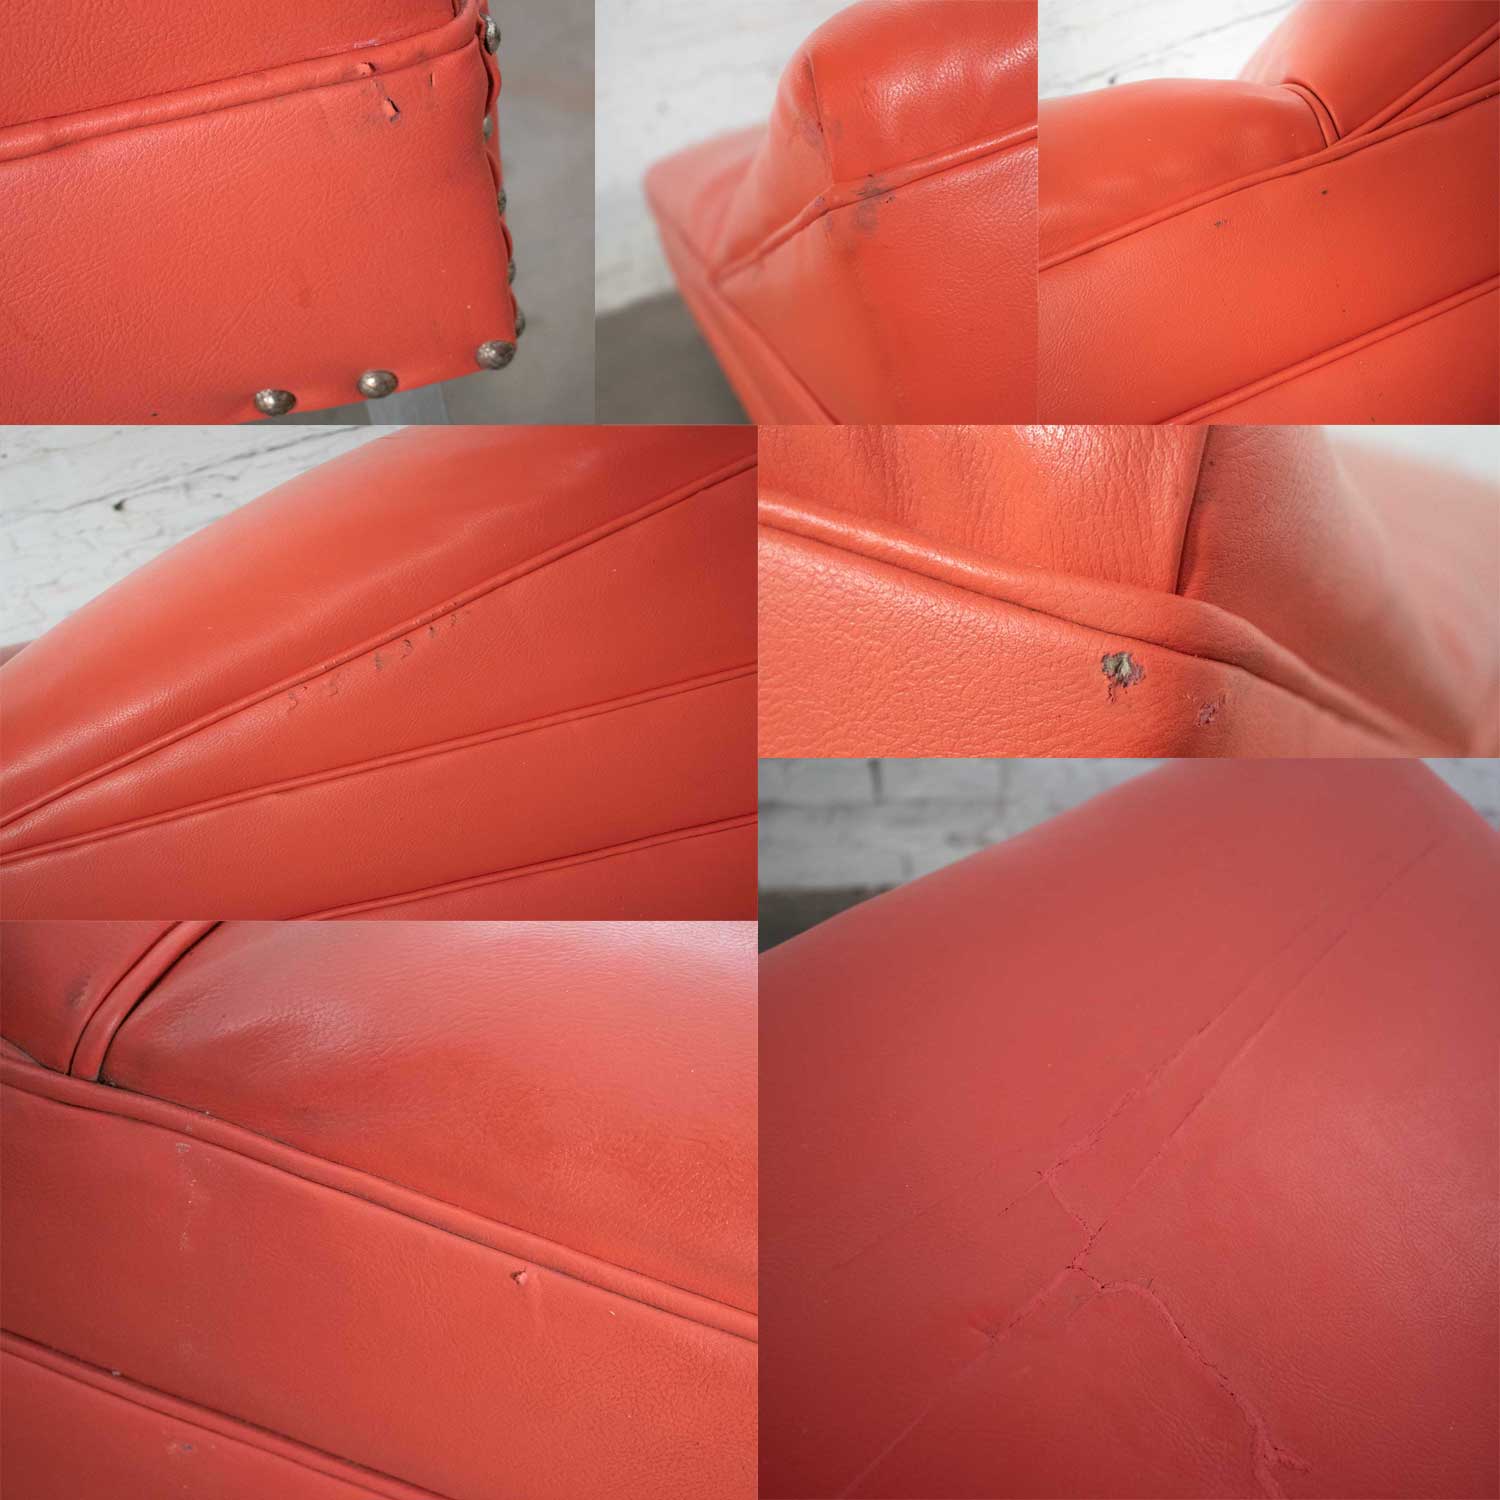 Mid Century Modern Chaise or Day Bed in Coral Vinyl Faux Leather with Aluminum Legs